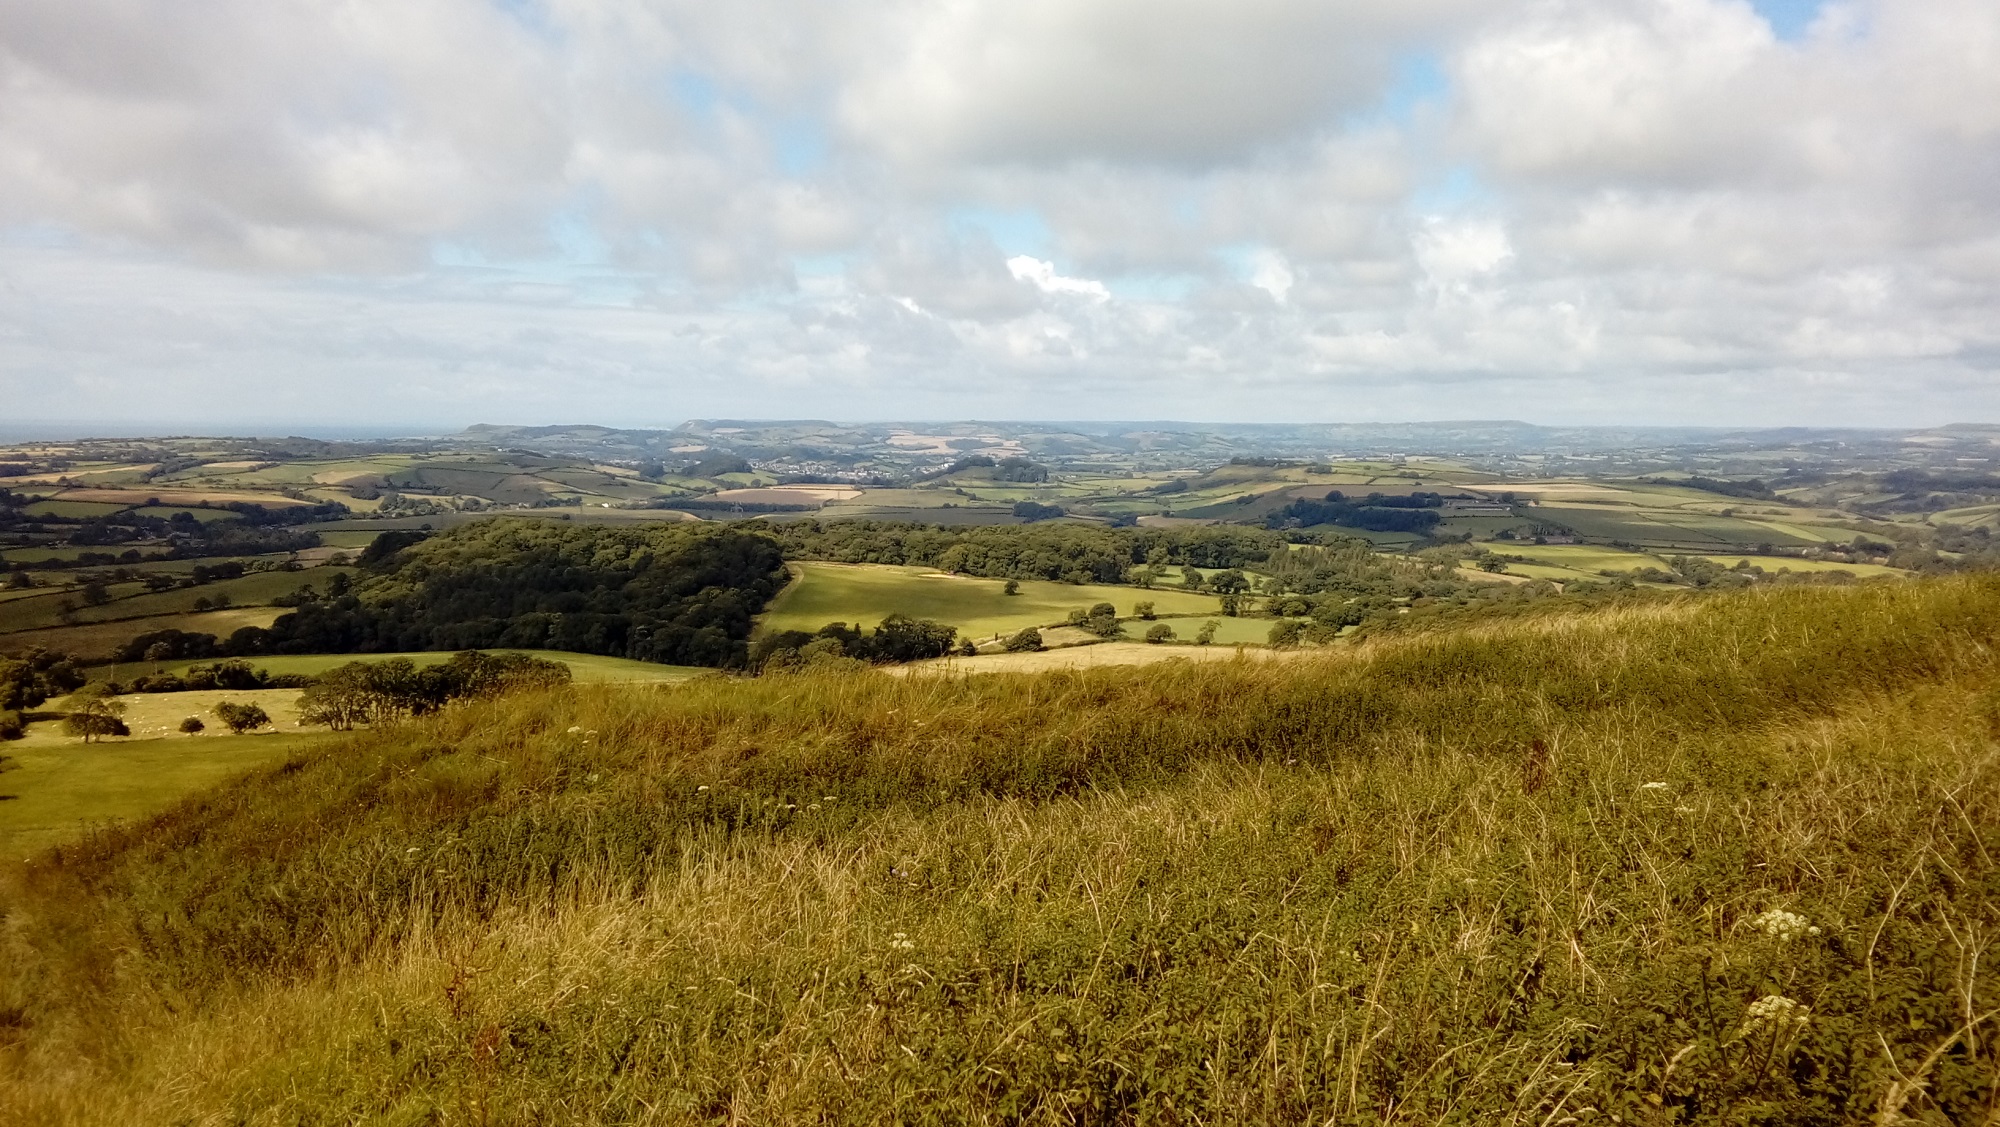 Looking west from Eggardon Hill in Dorset. A grassy foreground with fields, hills and woods in the distance.